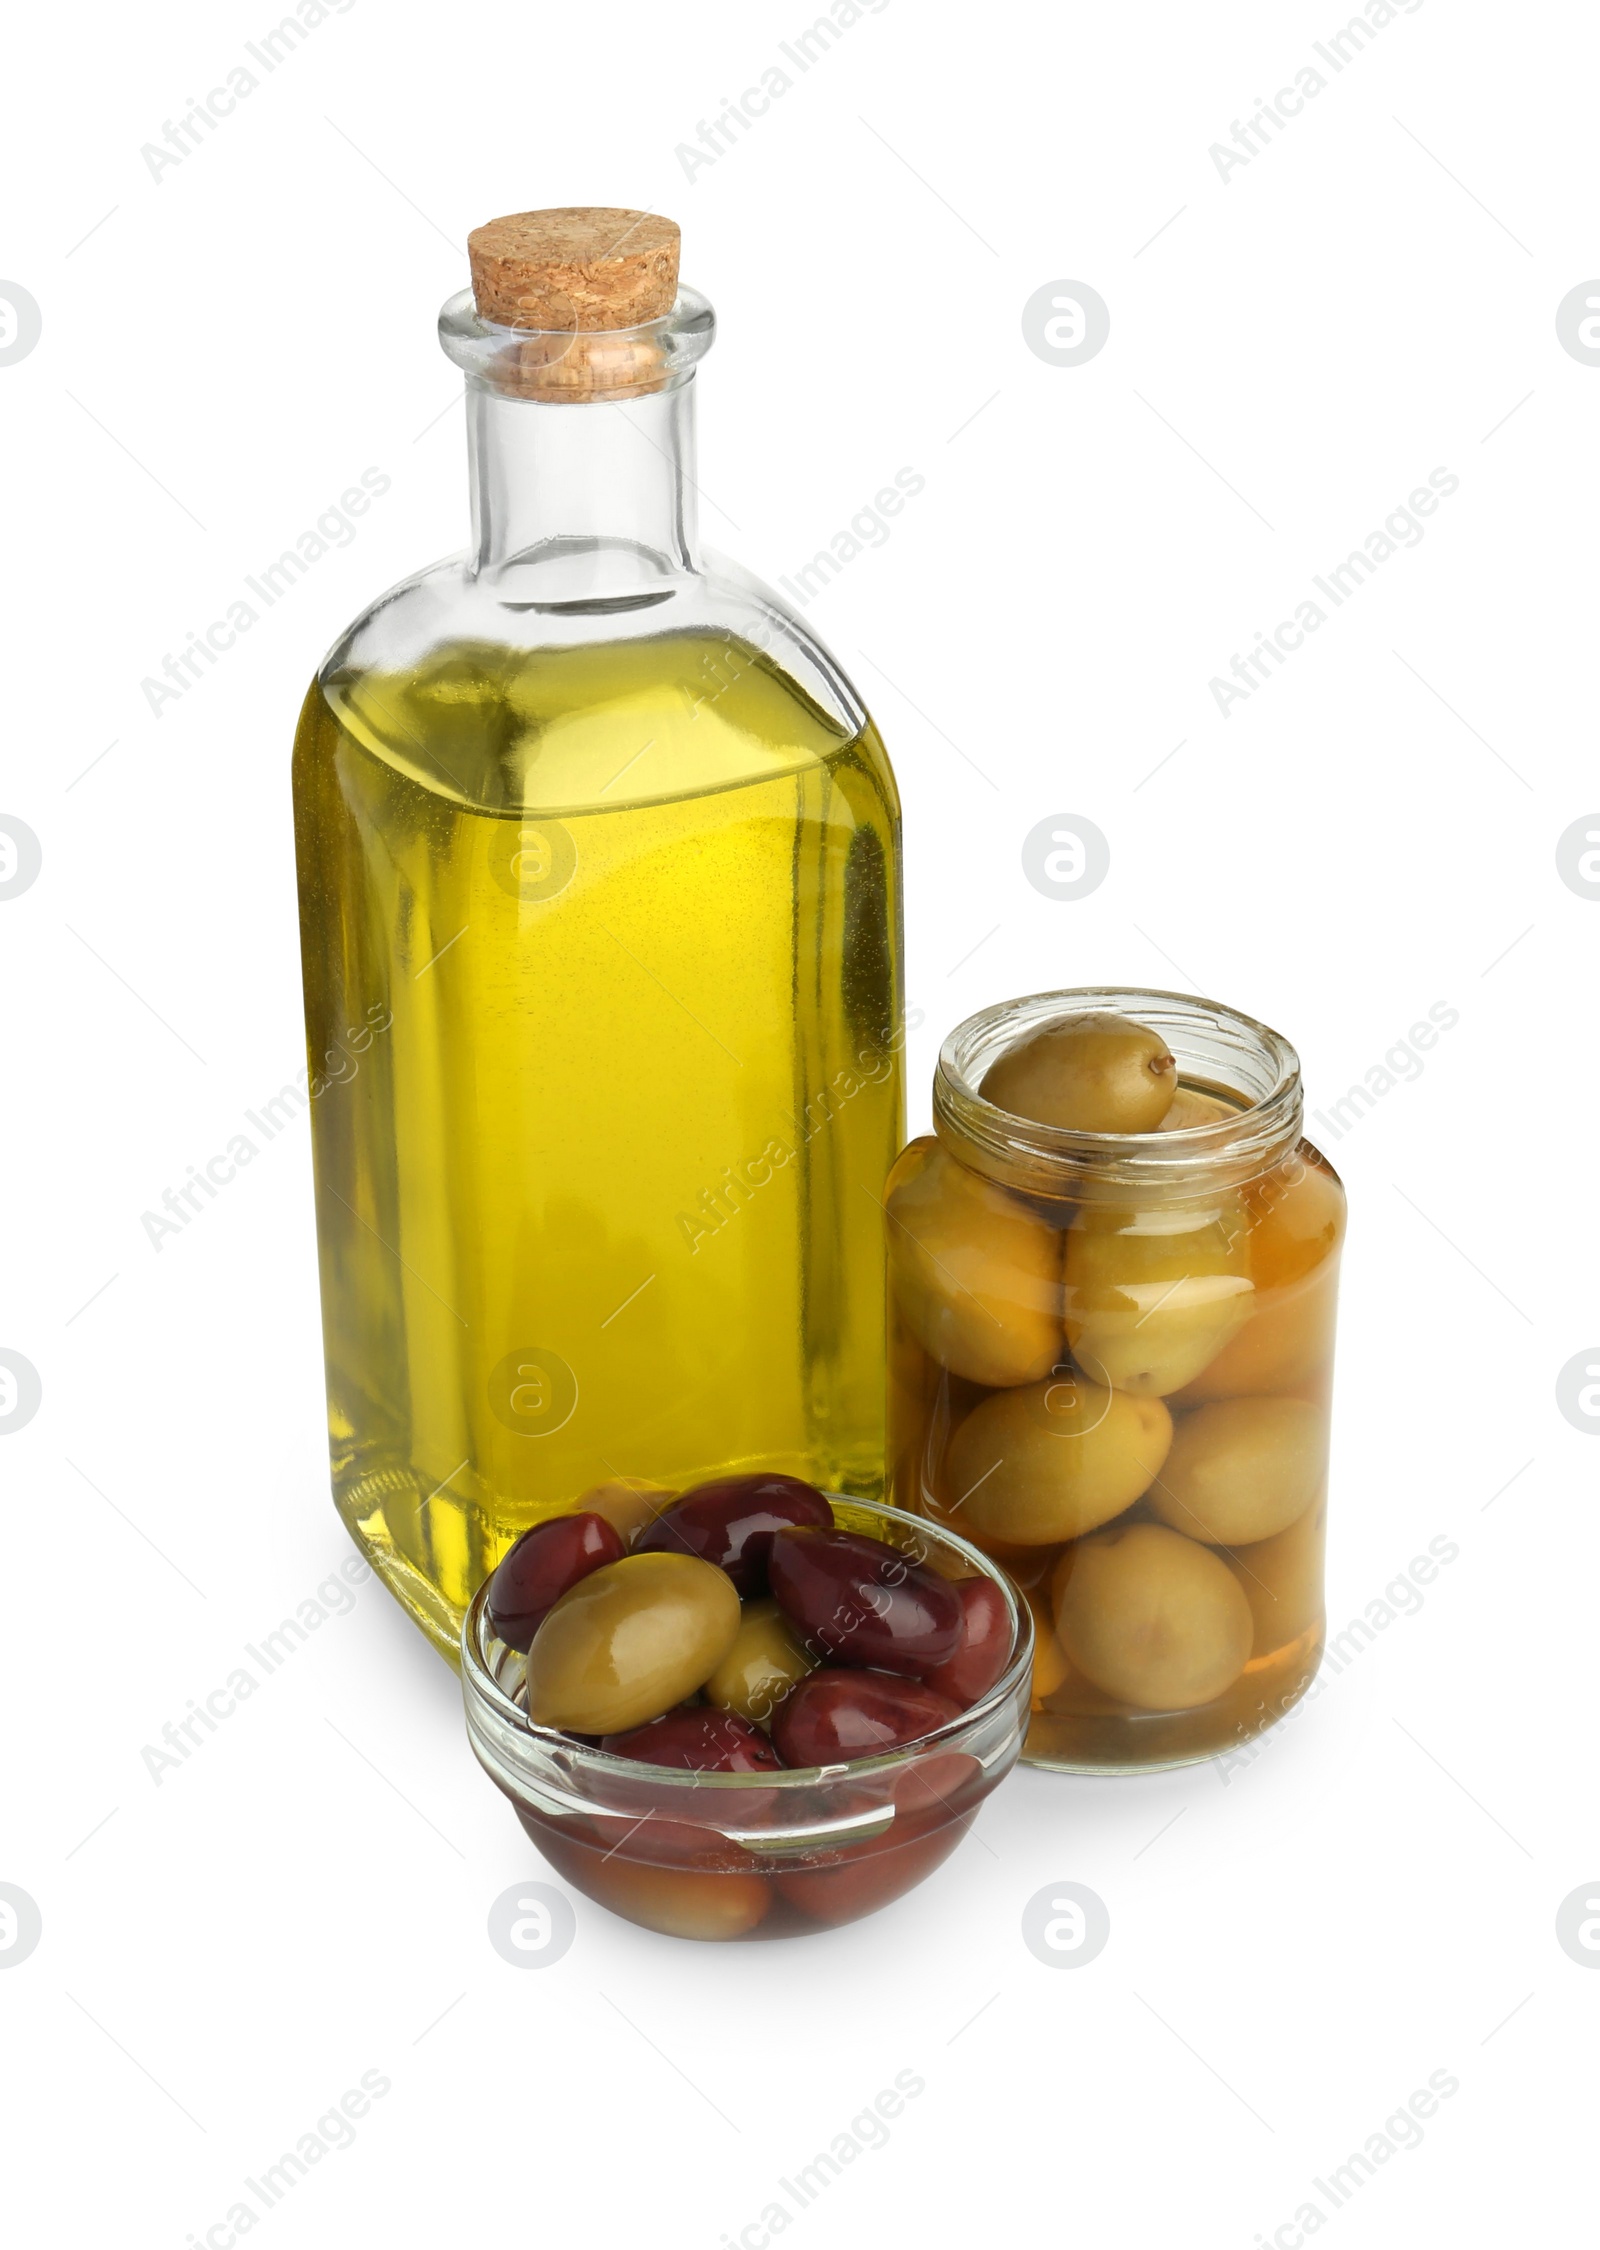 Photo of Vegetable fats. Bottle of cooking oil and olives isolated on white